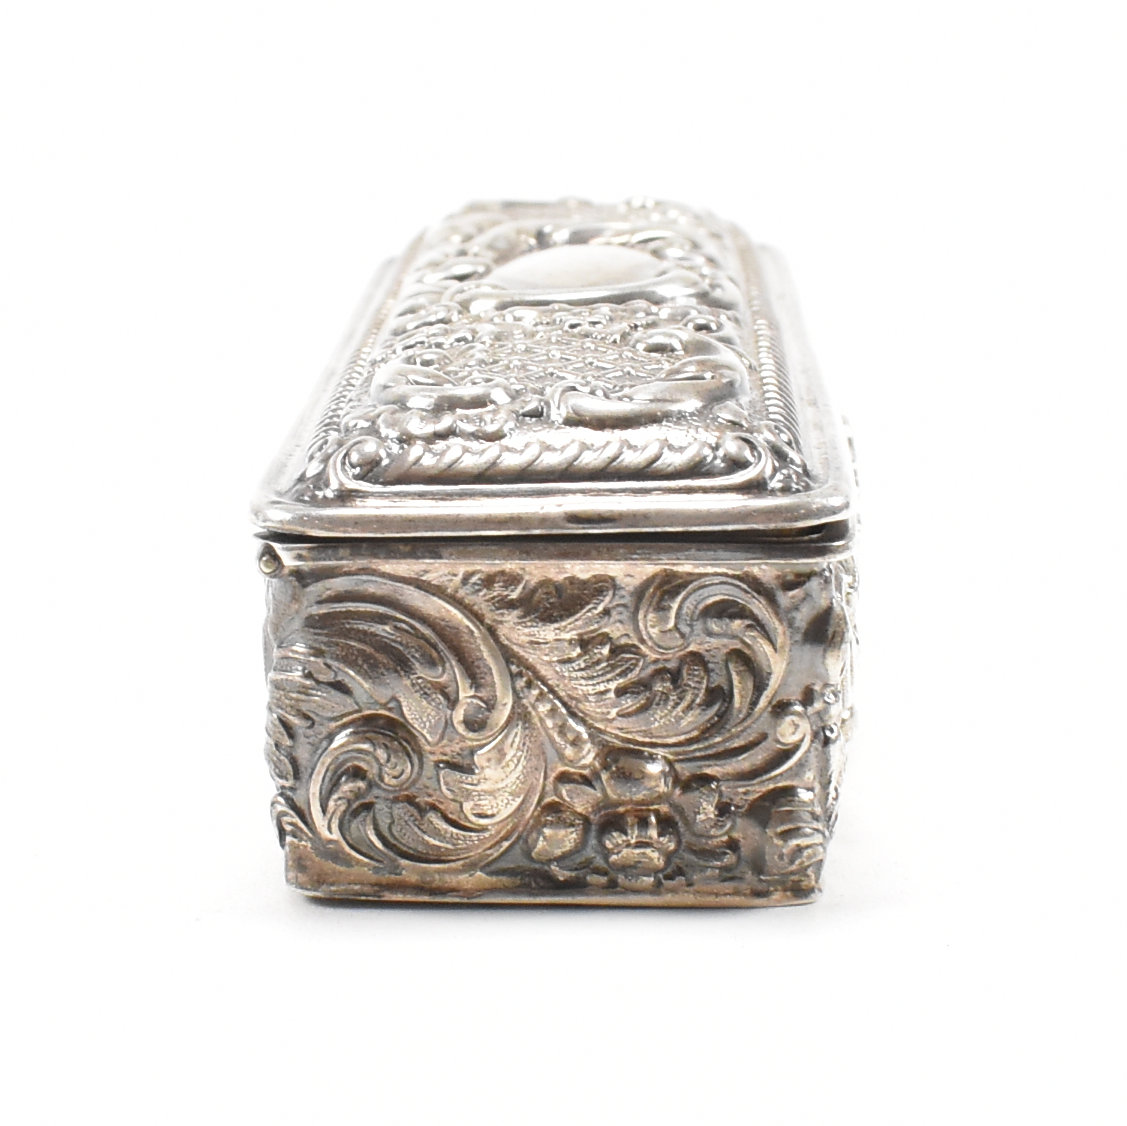 VICTORIAN HALLMARKED SILVER BOX BY WALKER & HALL - Image 4 of 9